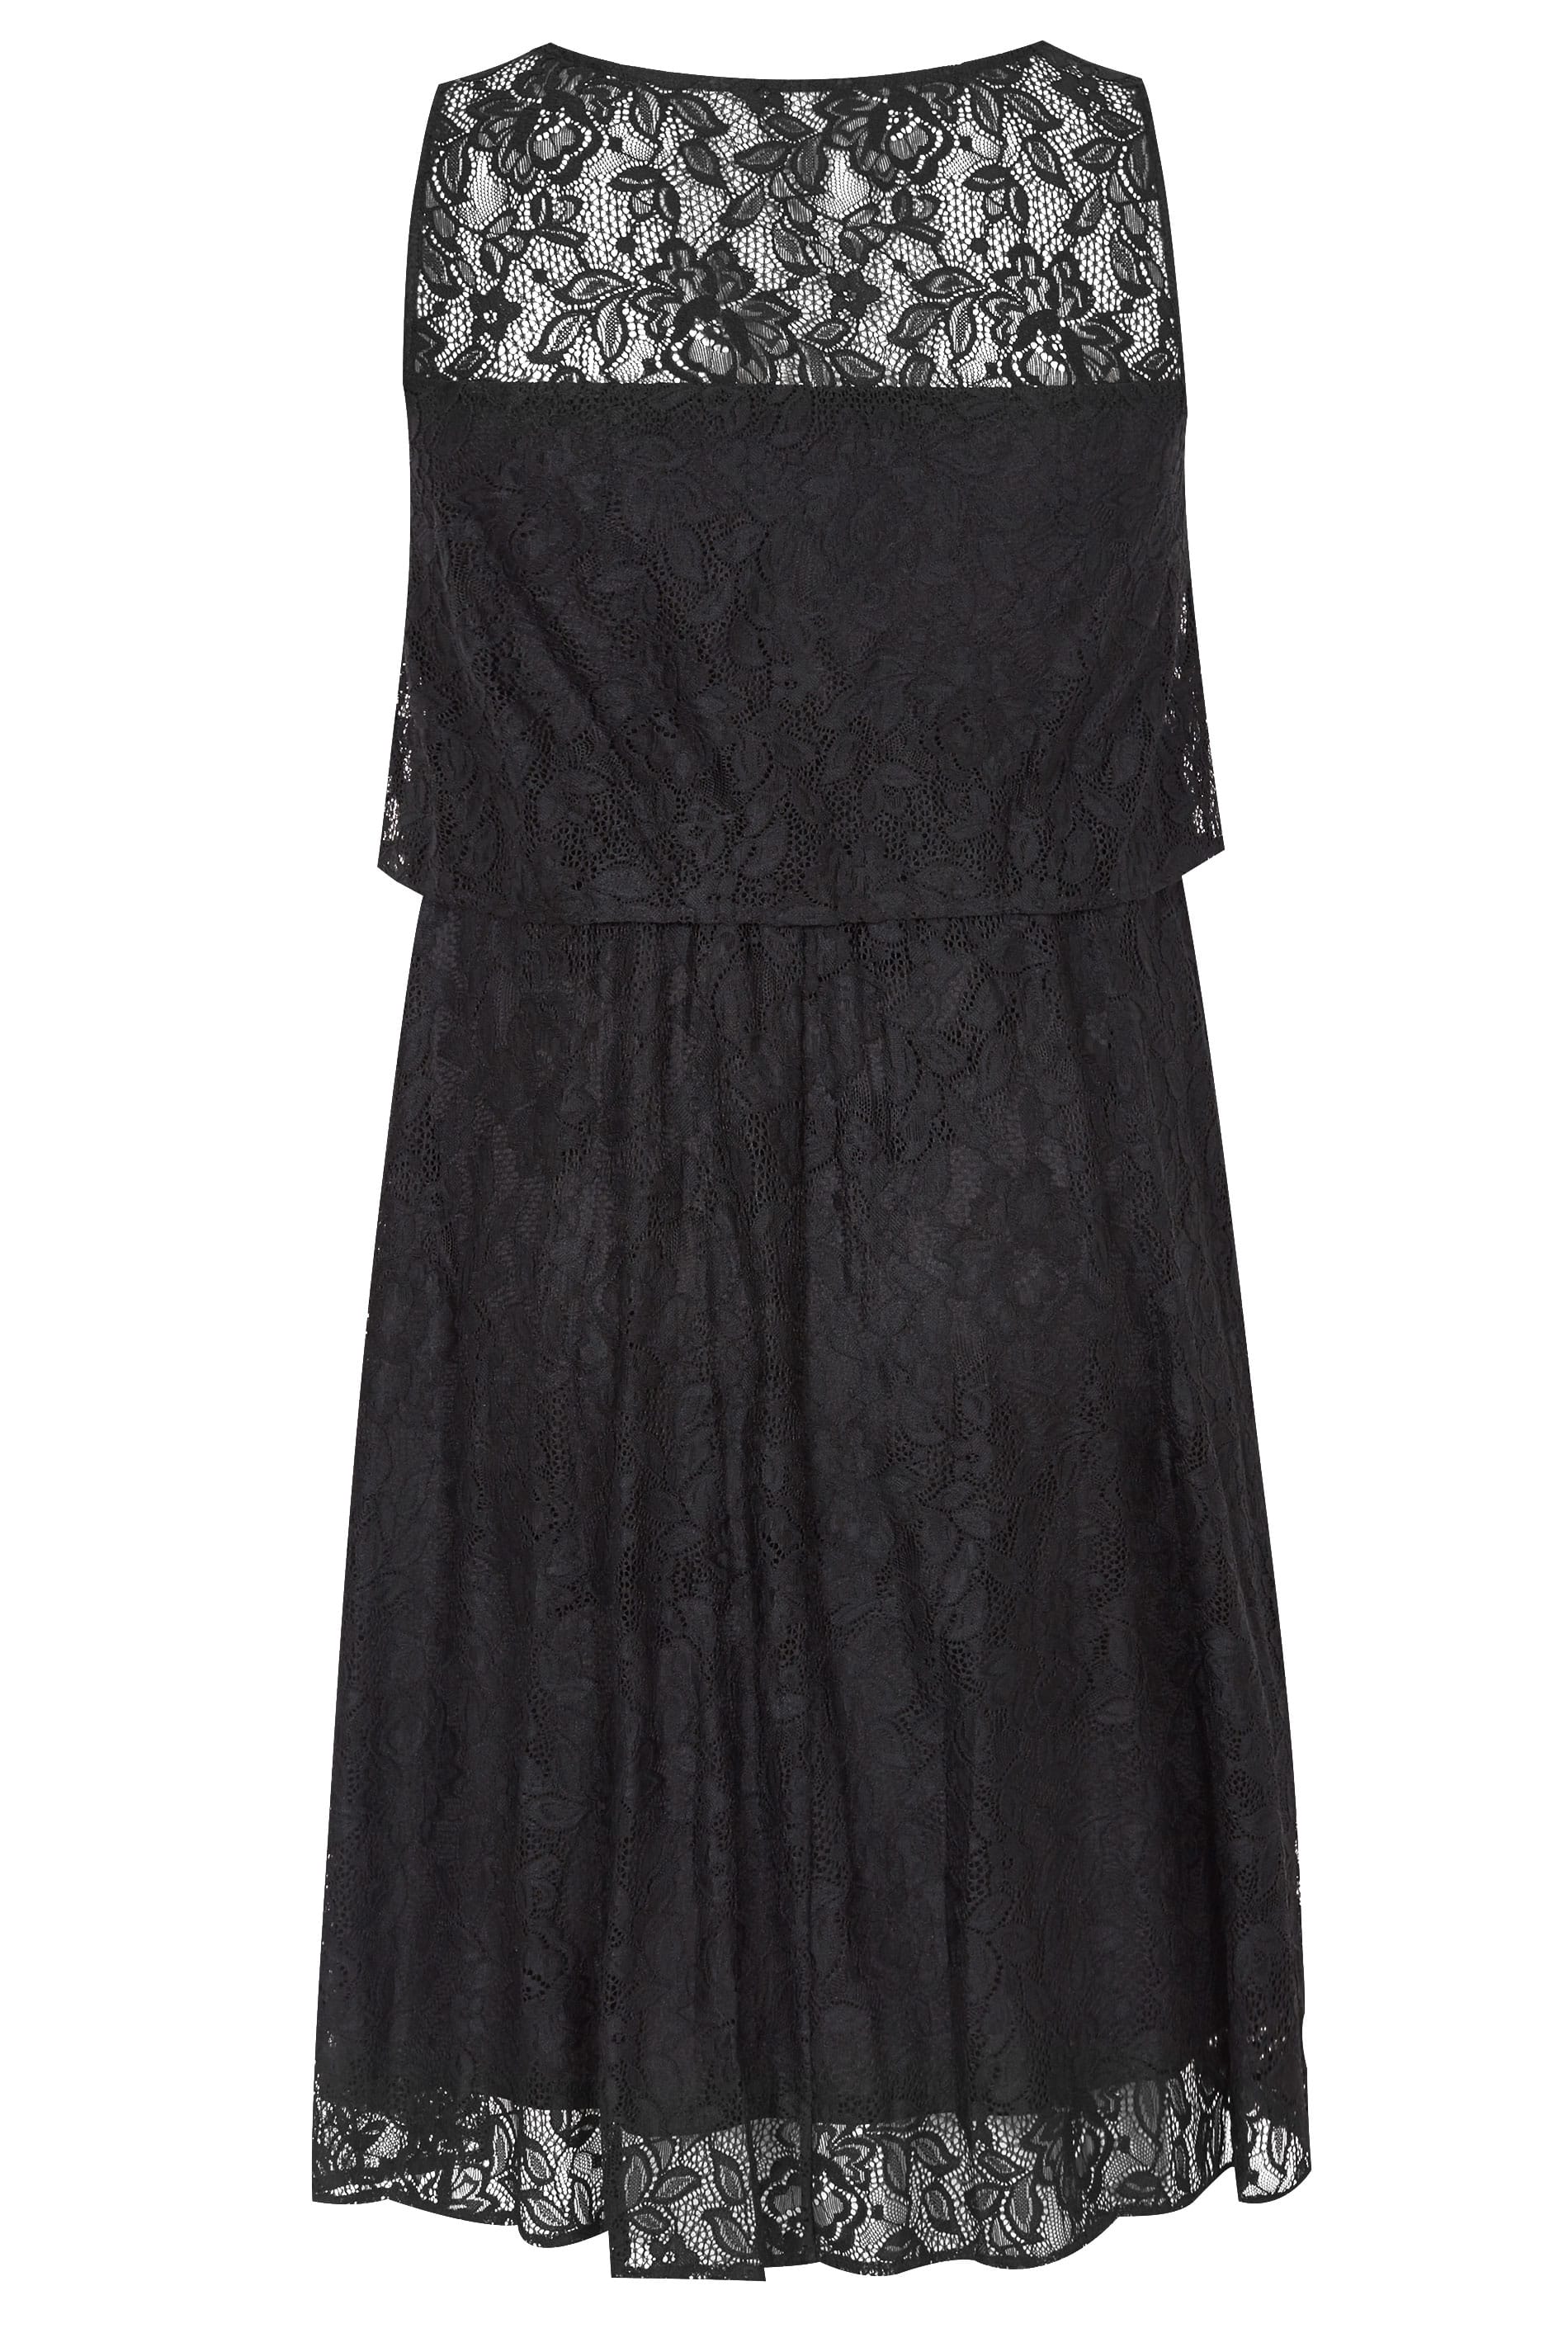 Plus Size Black Layered Lace Dress | Sizes 16 to 36 | Yours Clothing